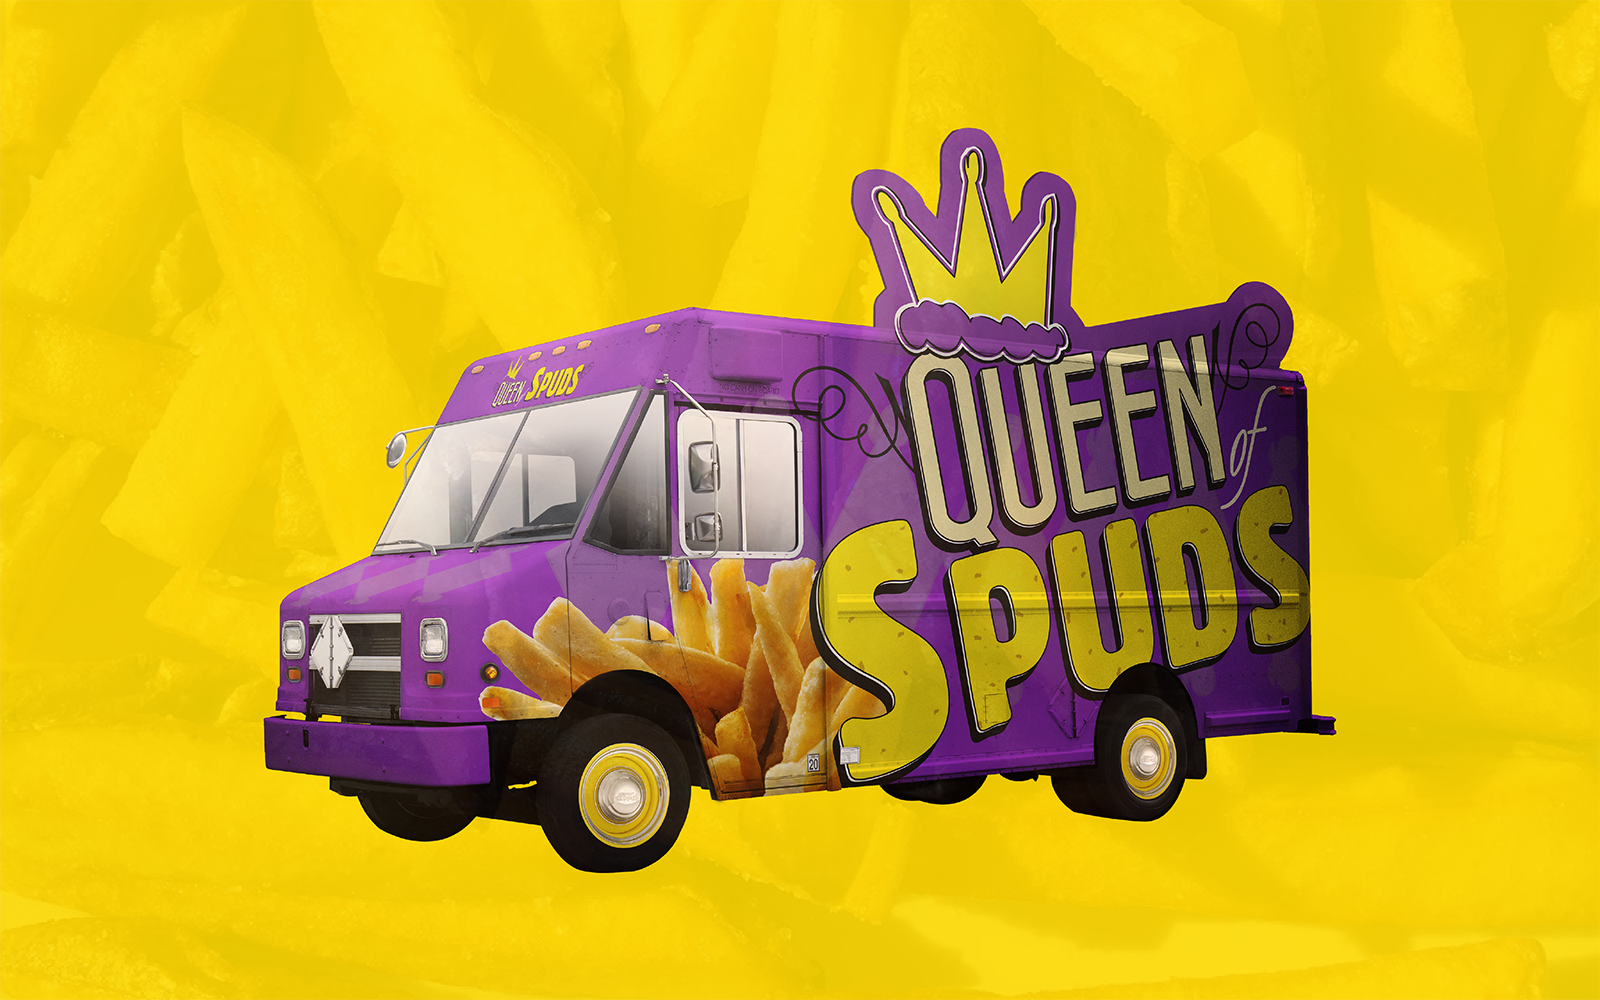 French fry background with the Queen of Spuds food truck.